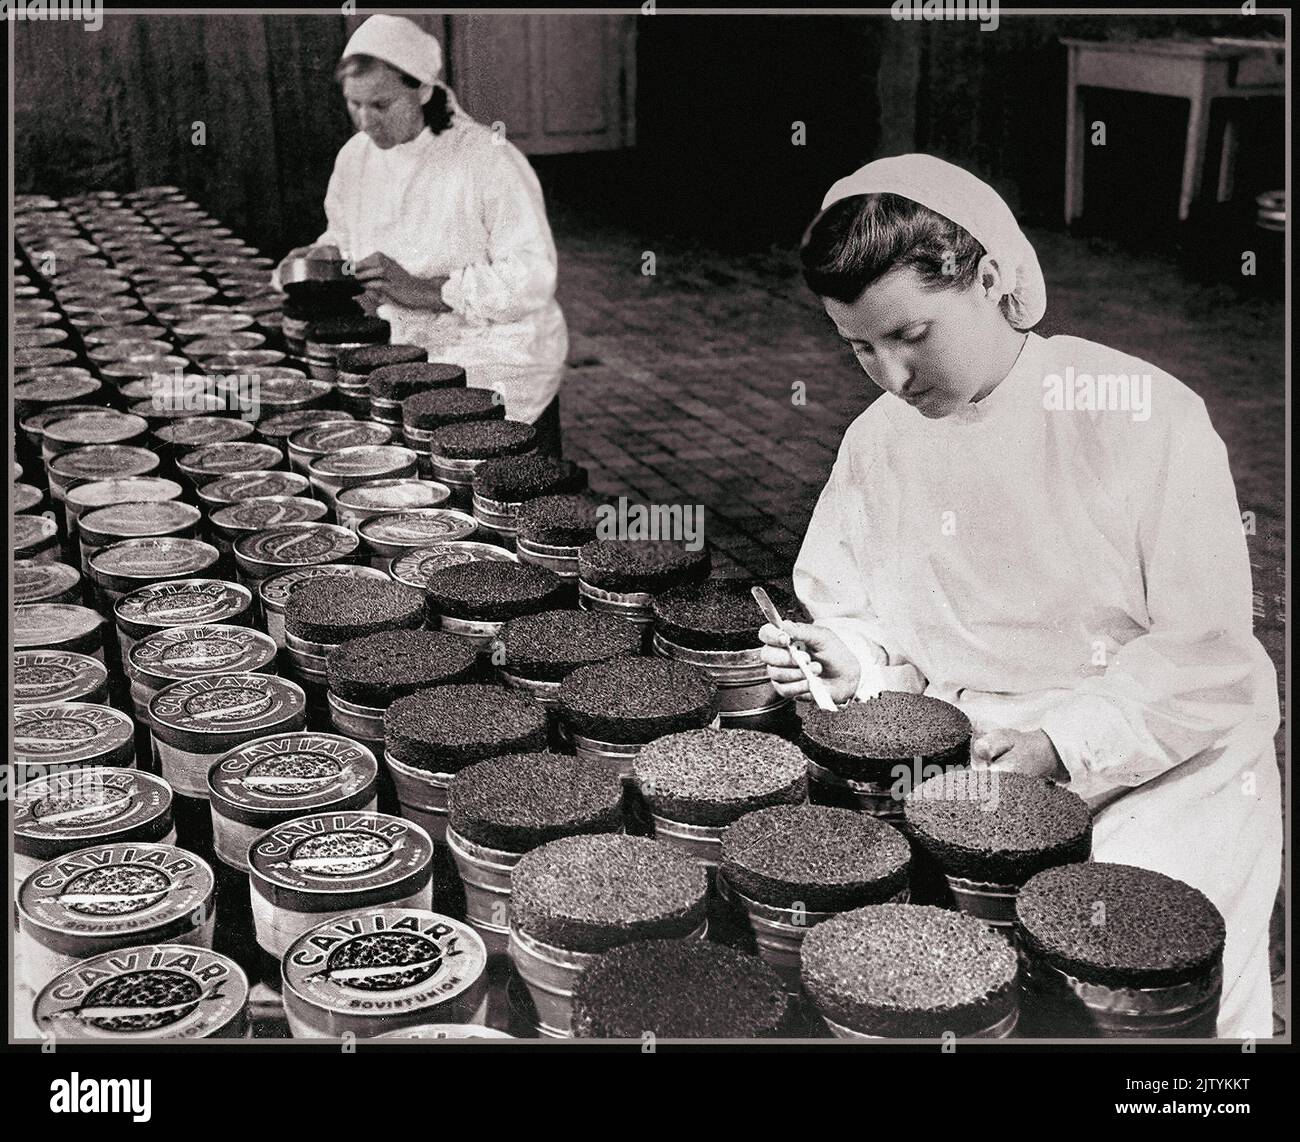 CAVIAR Vintage Beluga Caviar Production Canning and Quality Control Line for export in Kirov Fishery Azerbaijan USSR 1940s Stock Photo